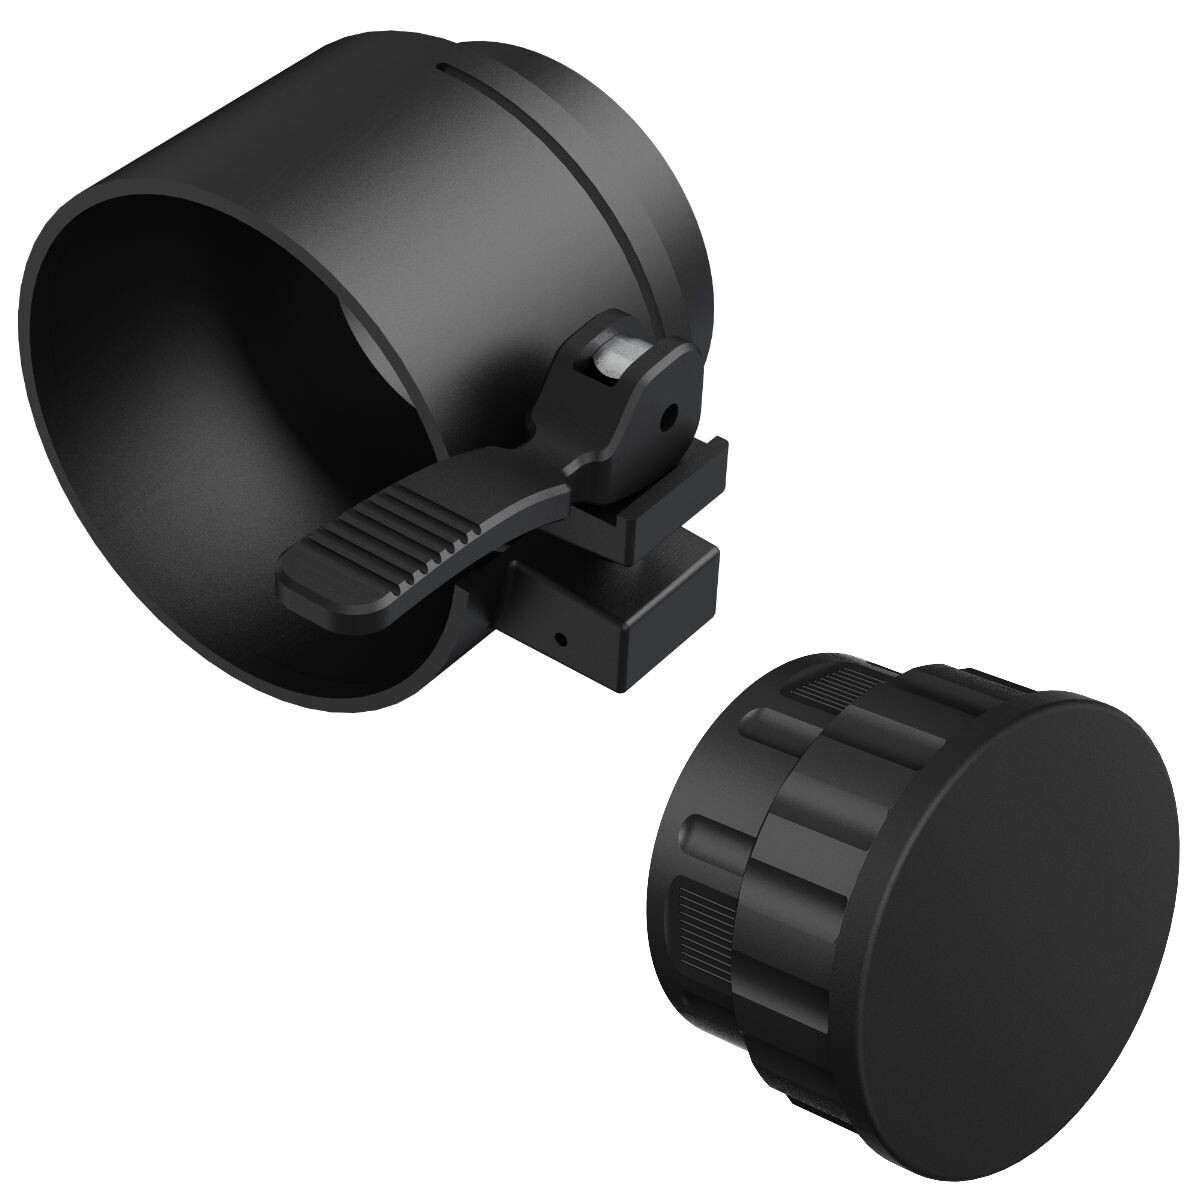 HIK Micro Scope Adaptor Clamp & Clip-On Lens System - 3 Sizes